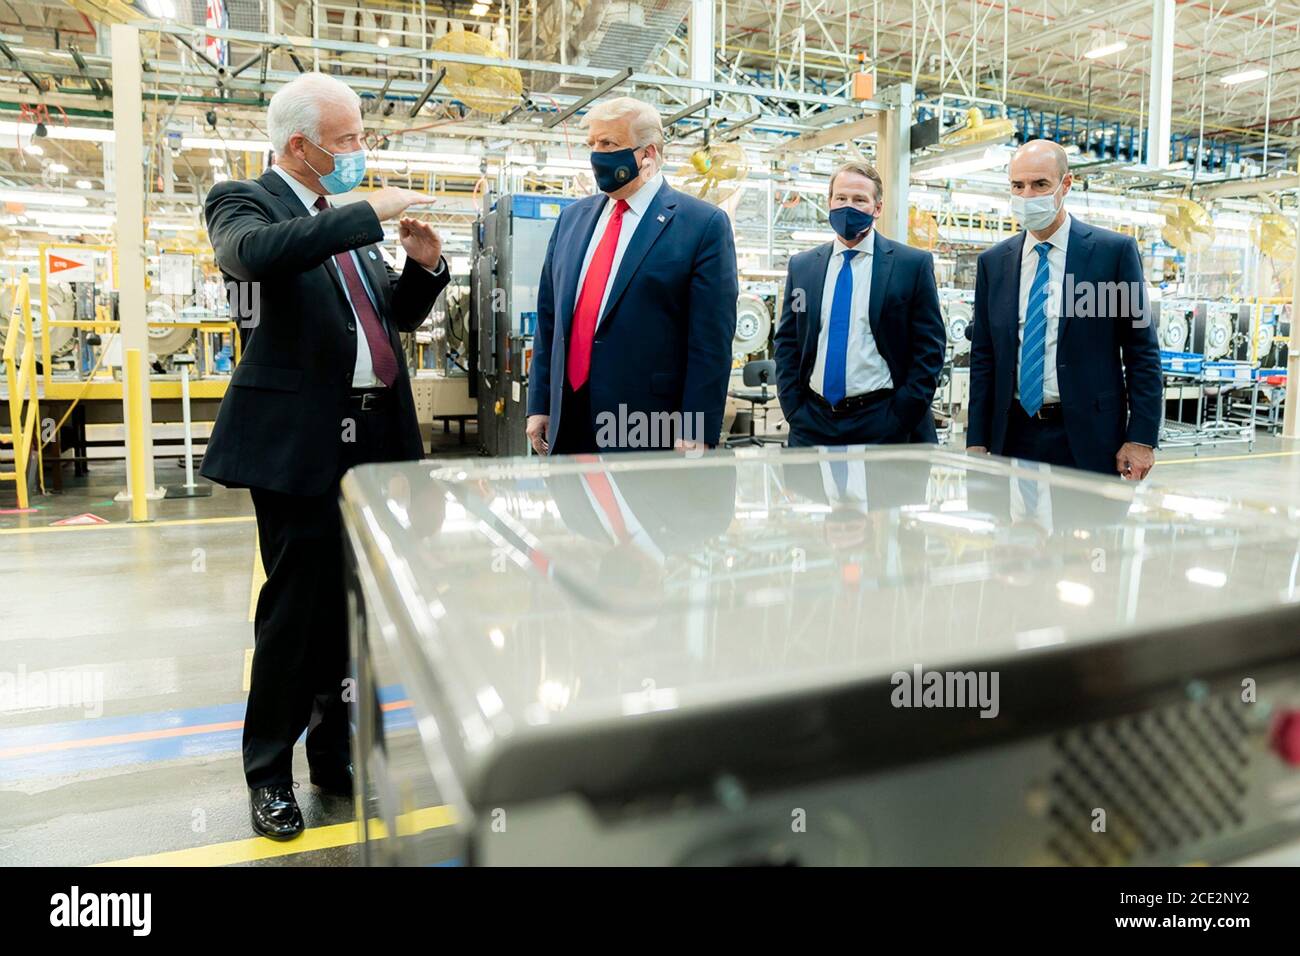 U.S. President Donald Trump, wearing a face mask, is given a tour of a Whirlpool Corporation Manufacturing Plant by VP Integrated Supply Chain and Quality Jim Keppler, left, August 6, 2020 in Clyde, Ohio. Stock Photo